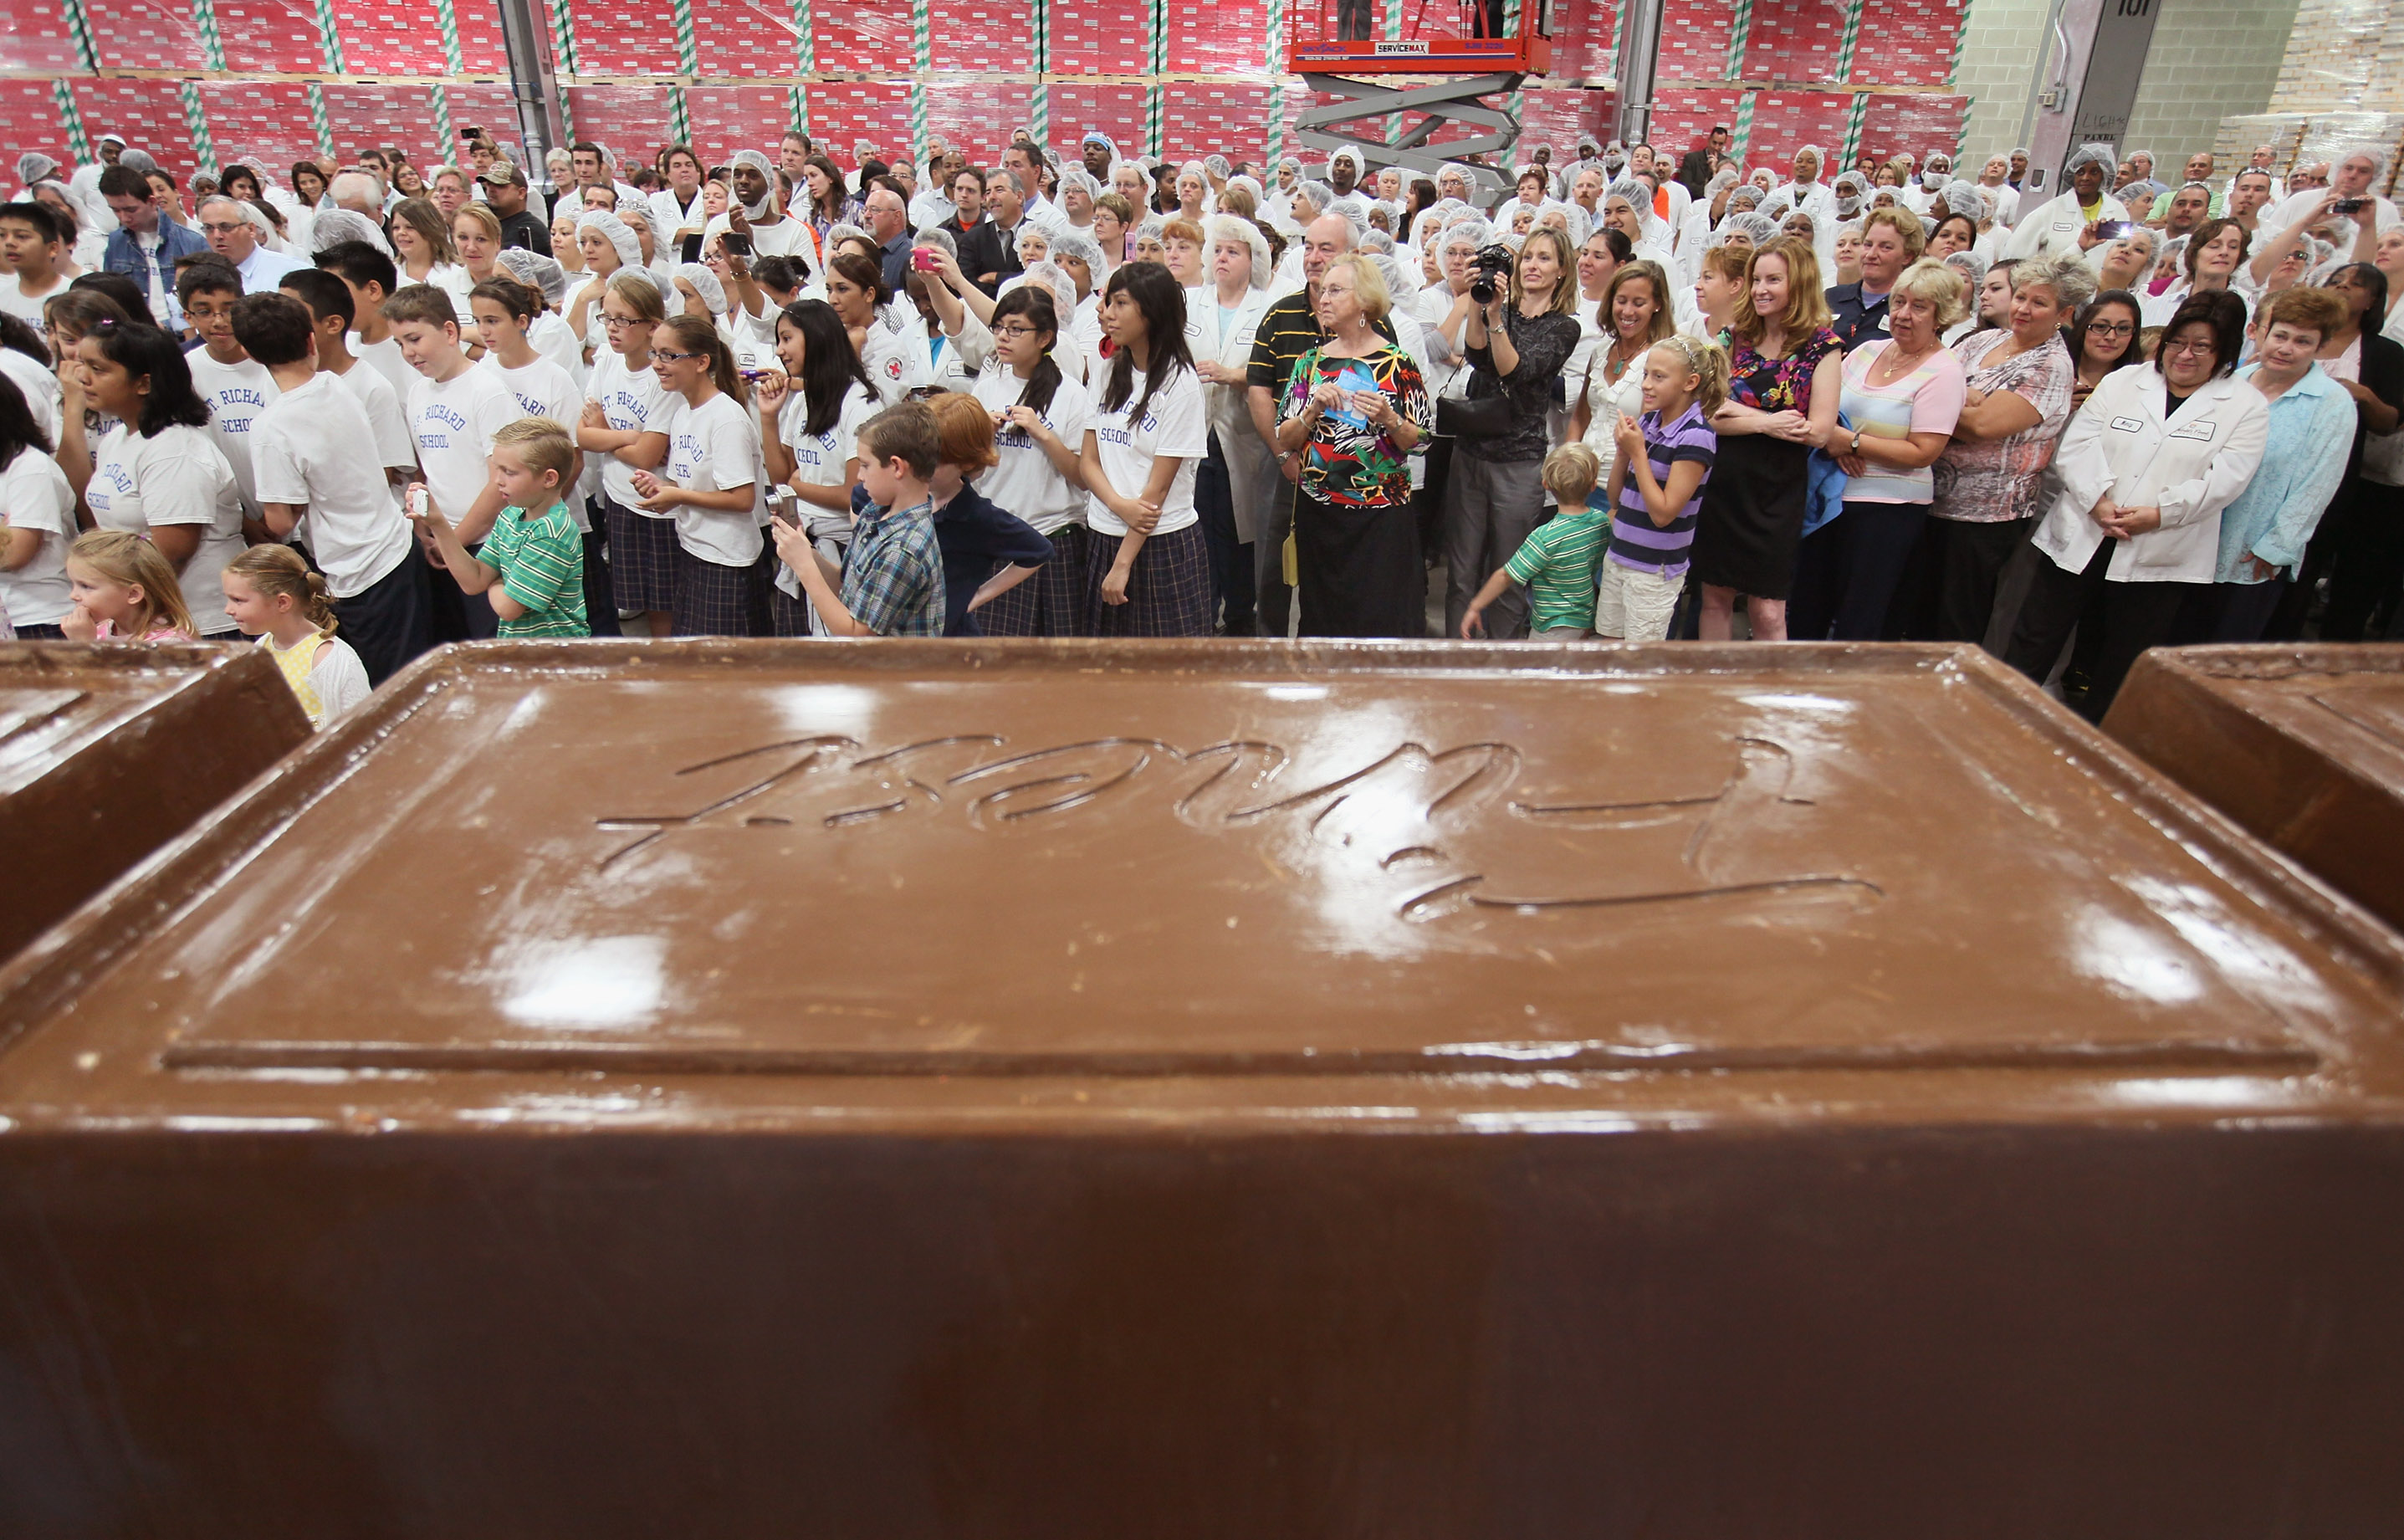 🍫 You Can Eat Chocolate Only If You Get More Than 10/18 on This Quiz Guinness World Record Attempt At Largest Chocolate Bar